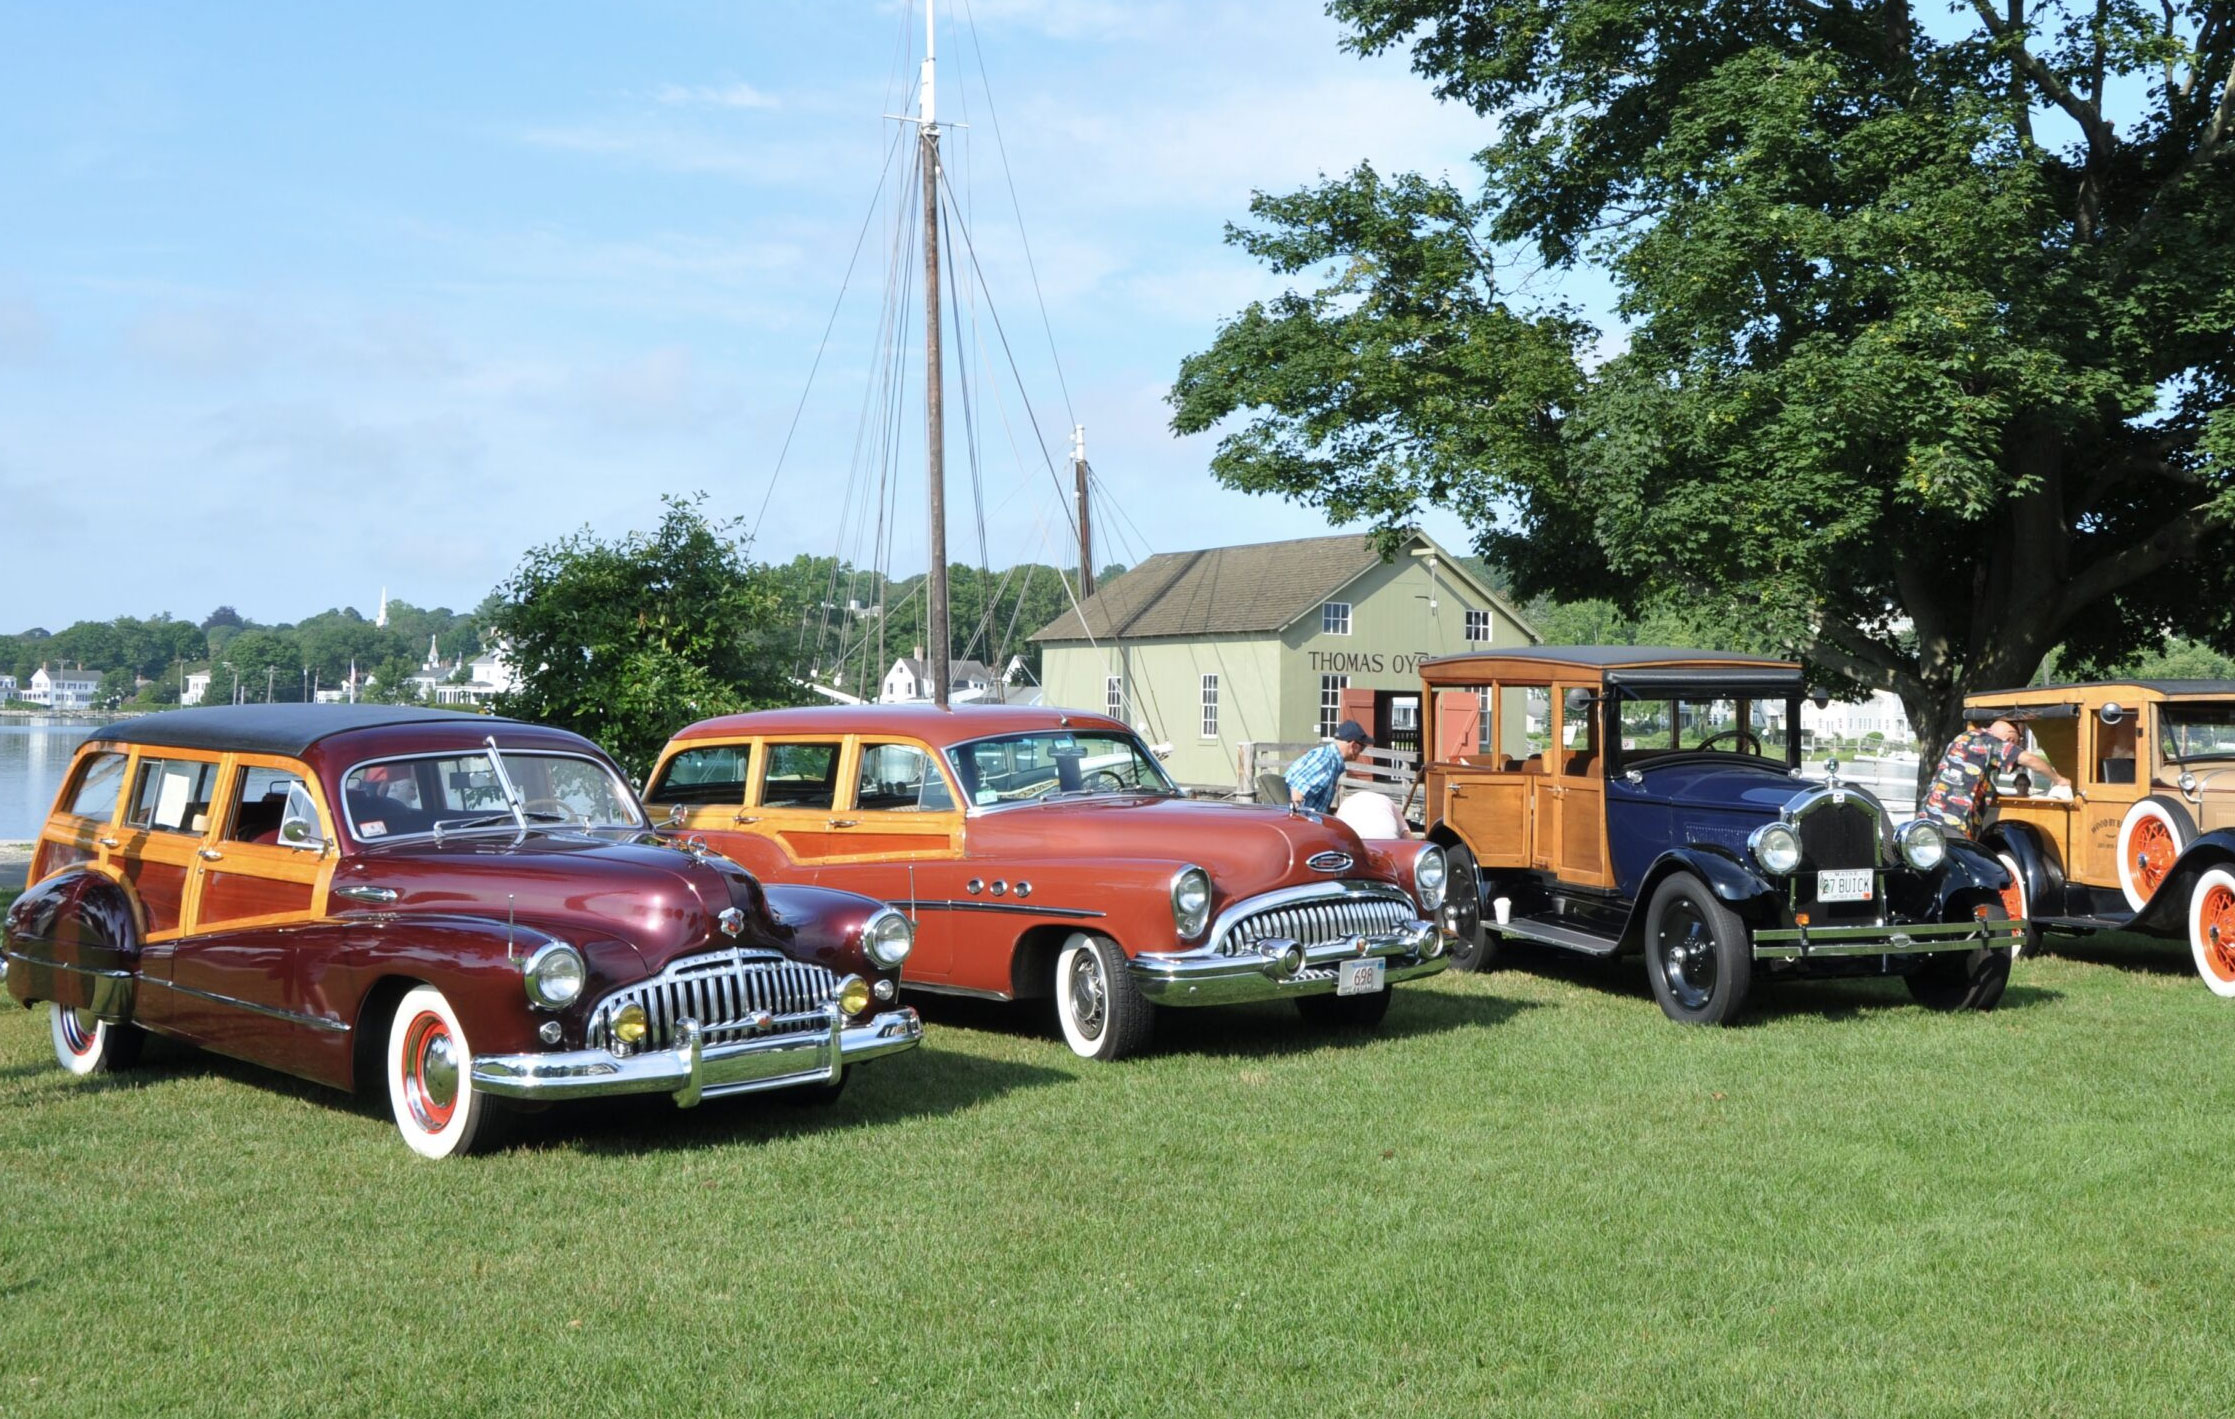 The Annual Woodies at Mystic Seaport Meet